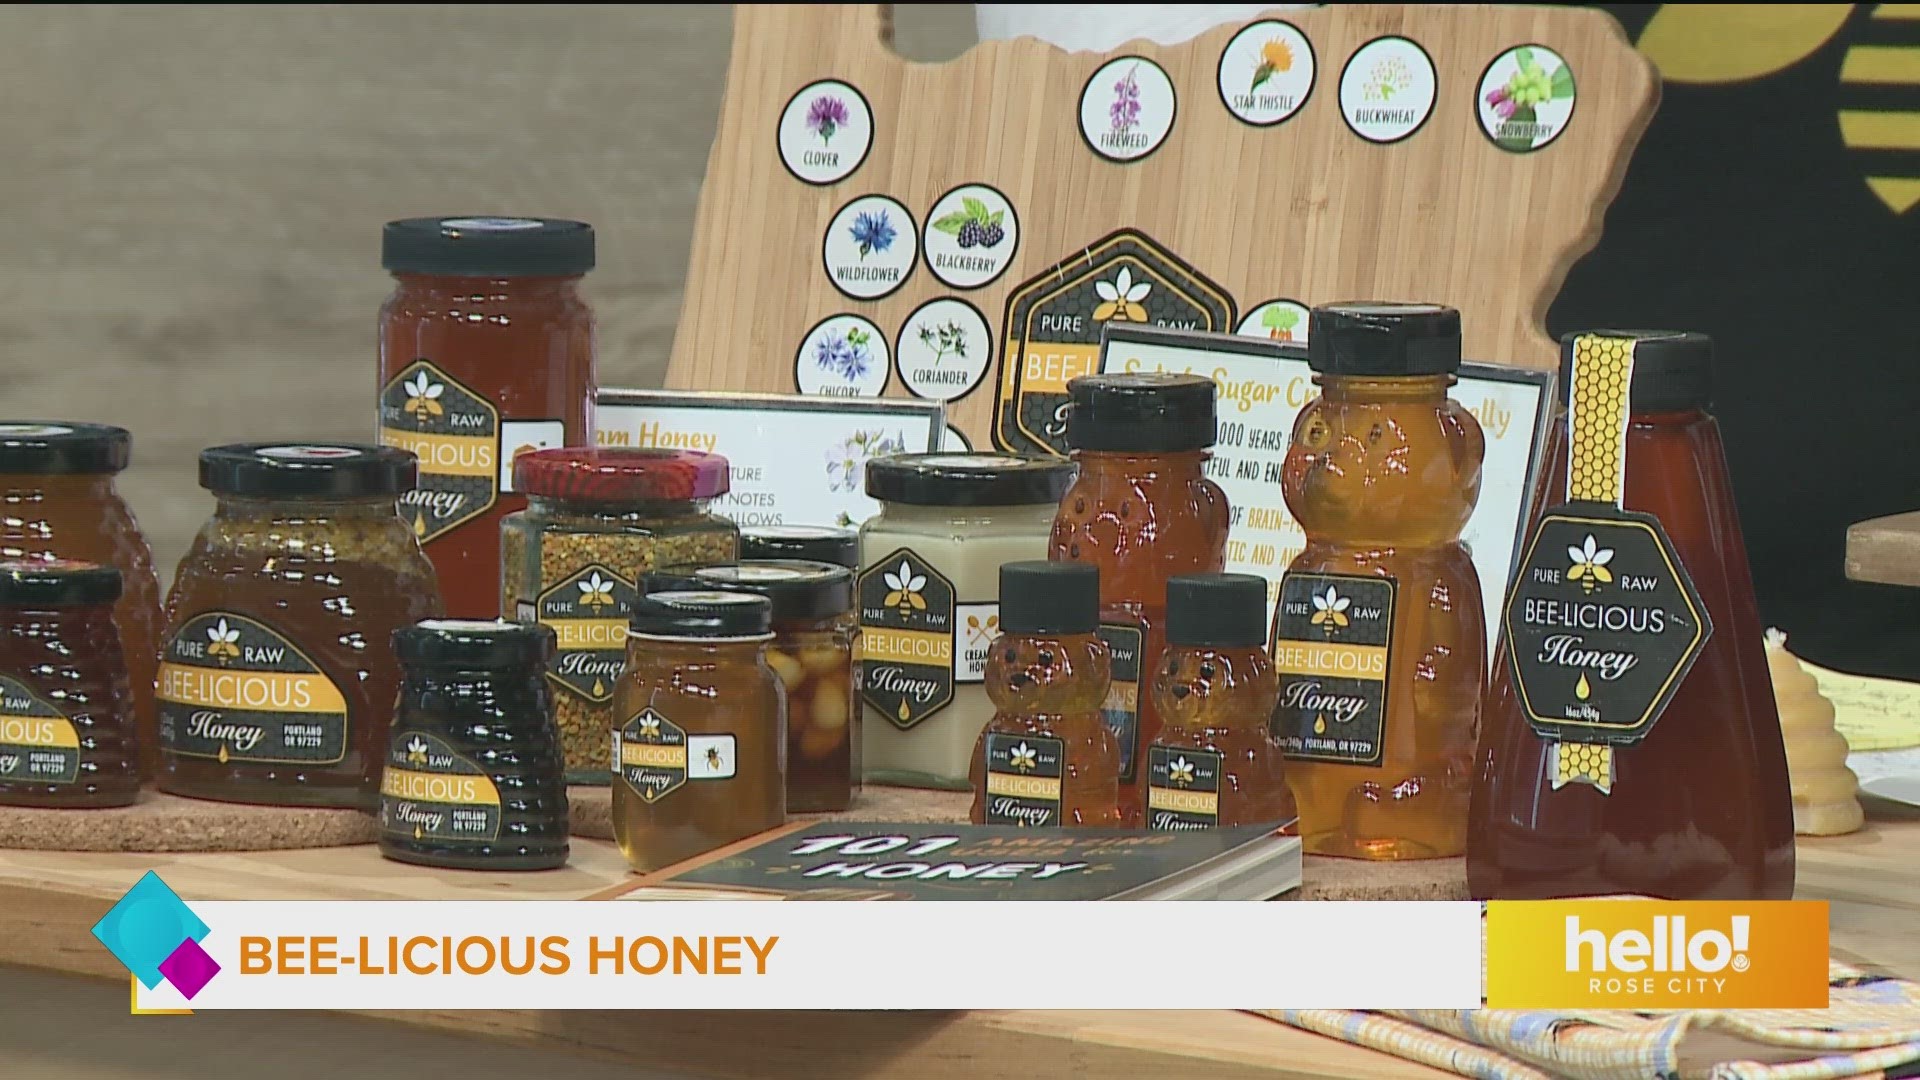 Bee-licious Honey started in 2011 and creates honey from Willamette Valley hives